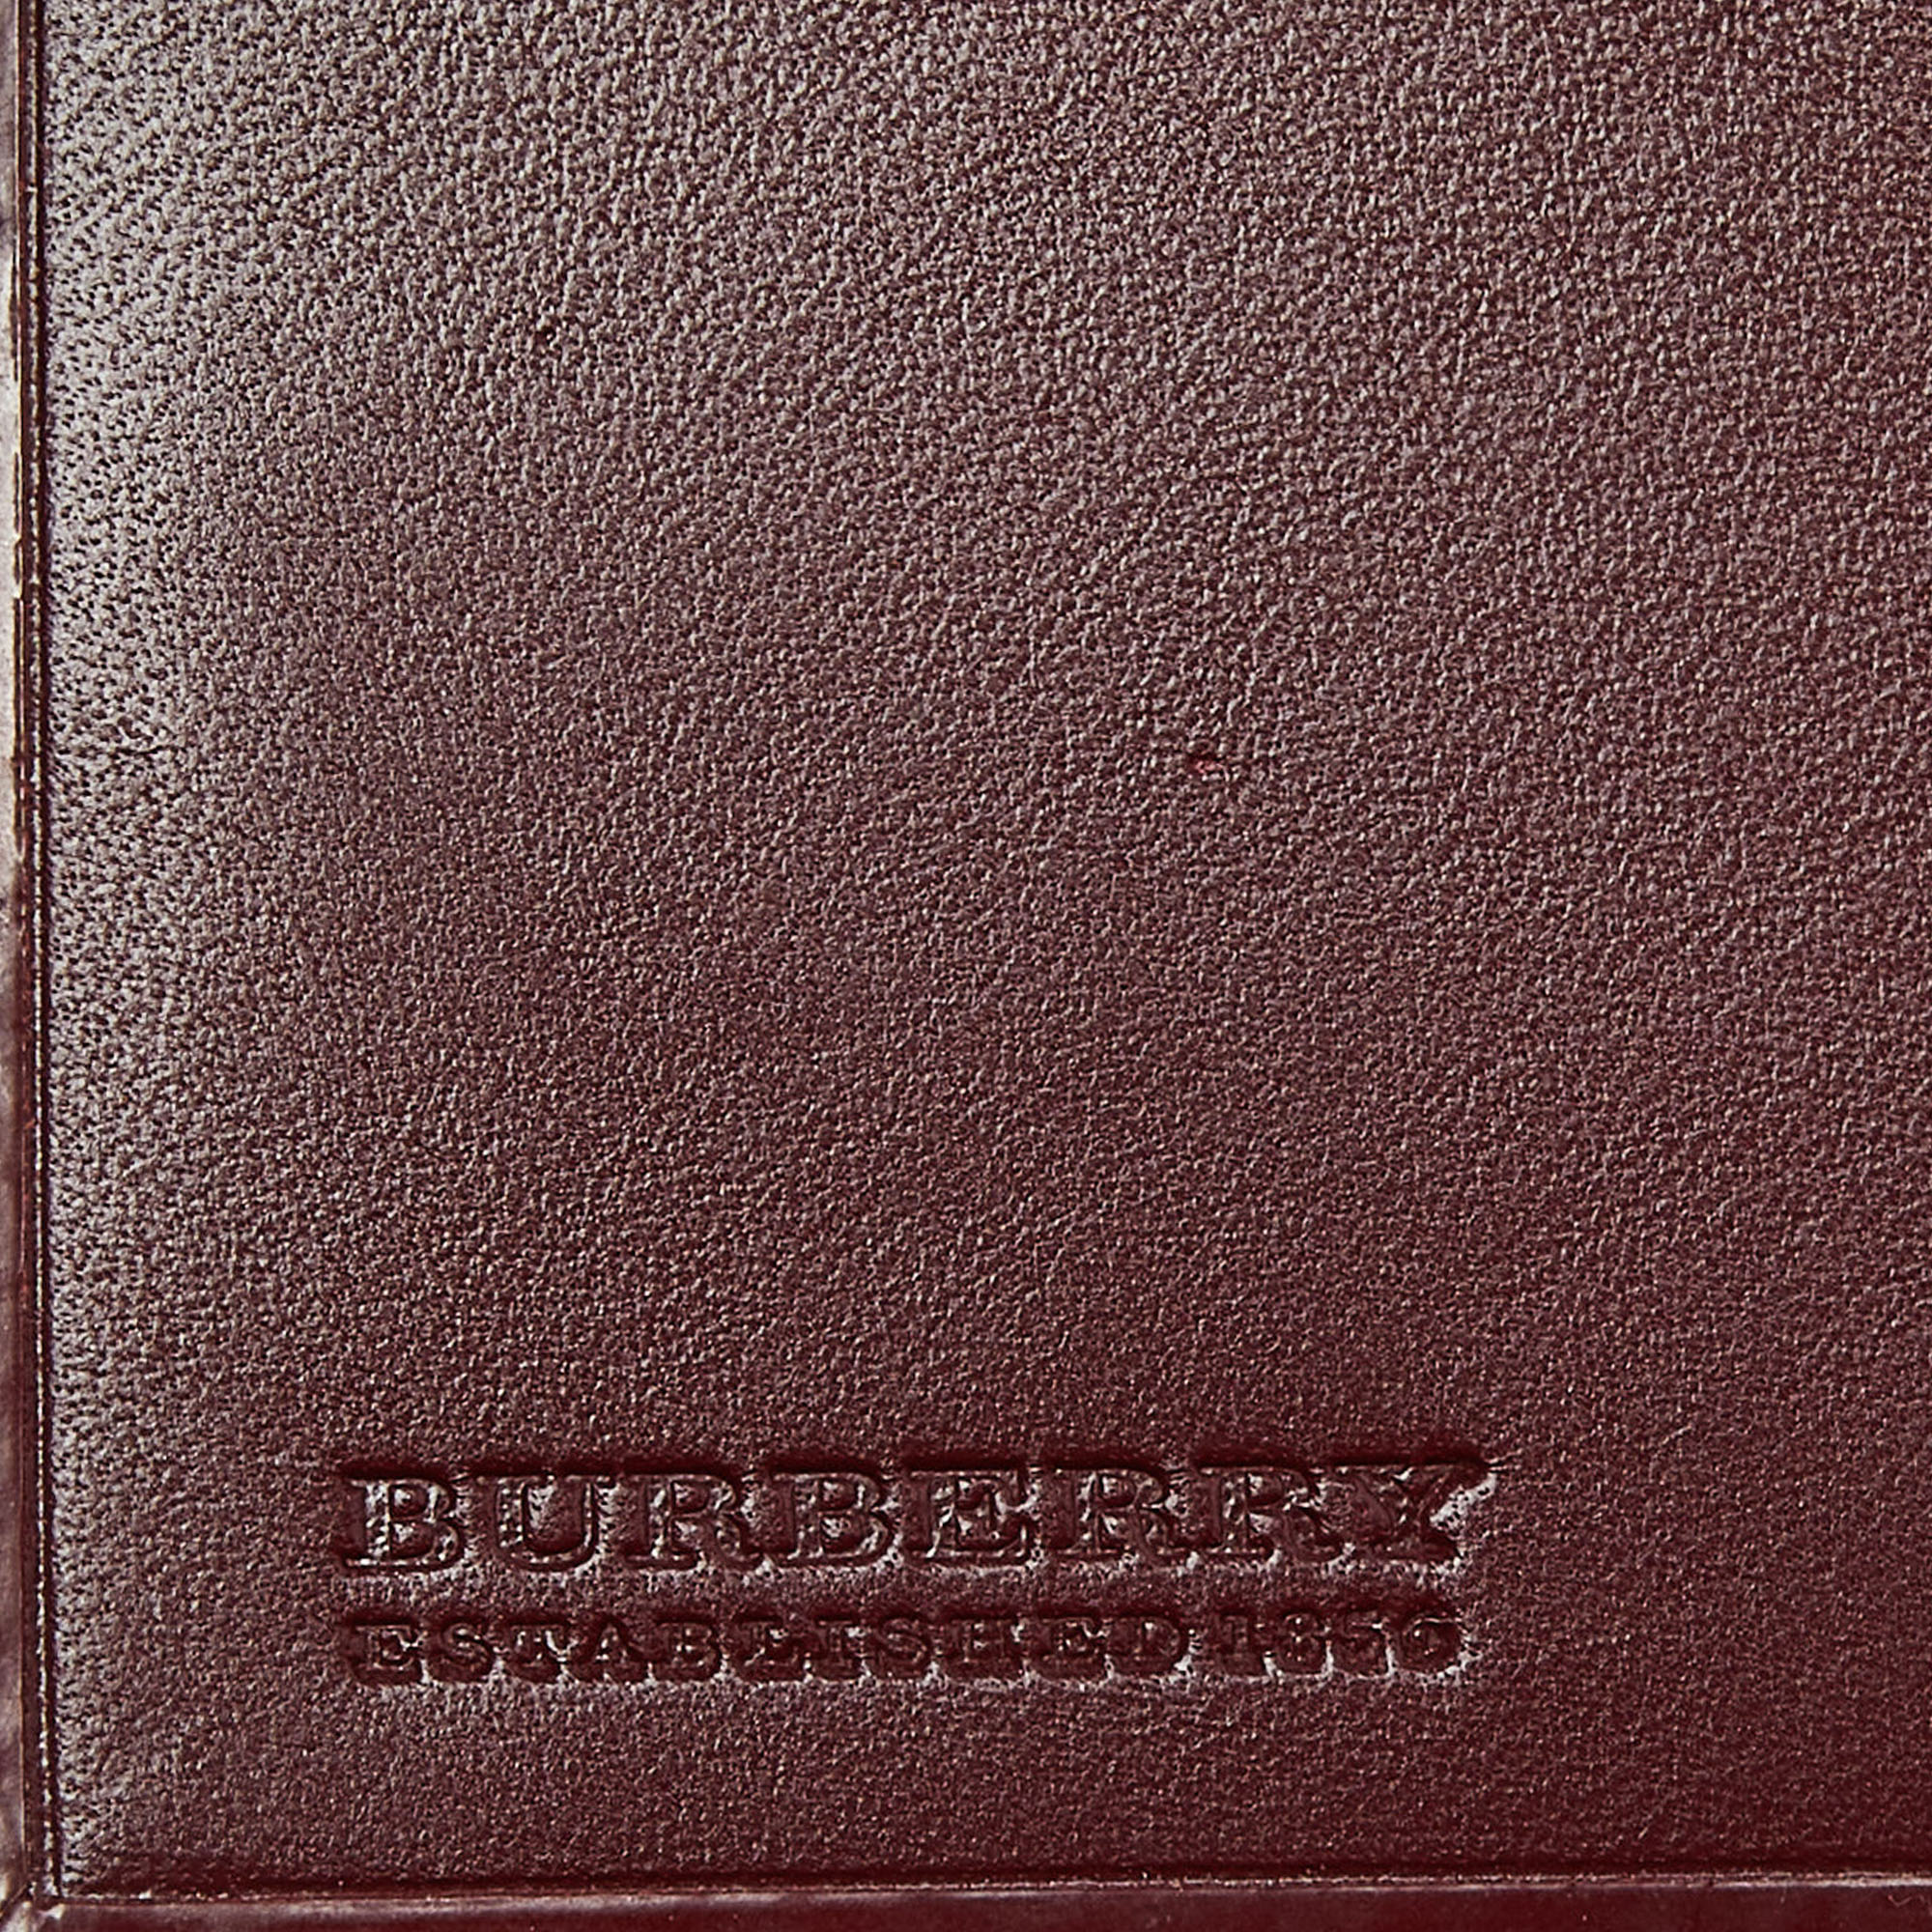 Burberry Burgundy Heart Nova Coated Canvas And Patent Leather Agenda Cover